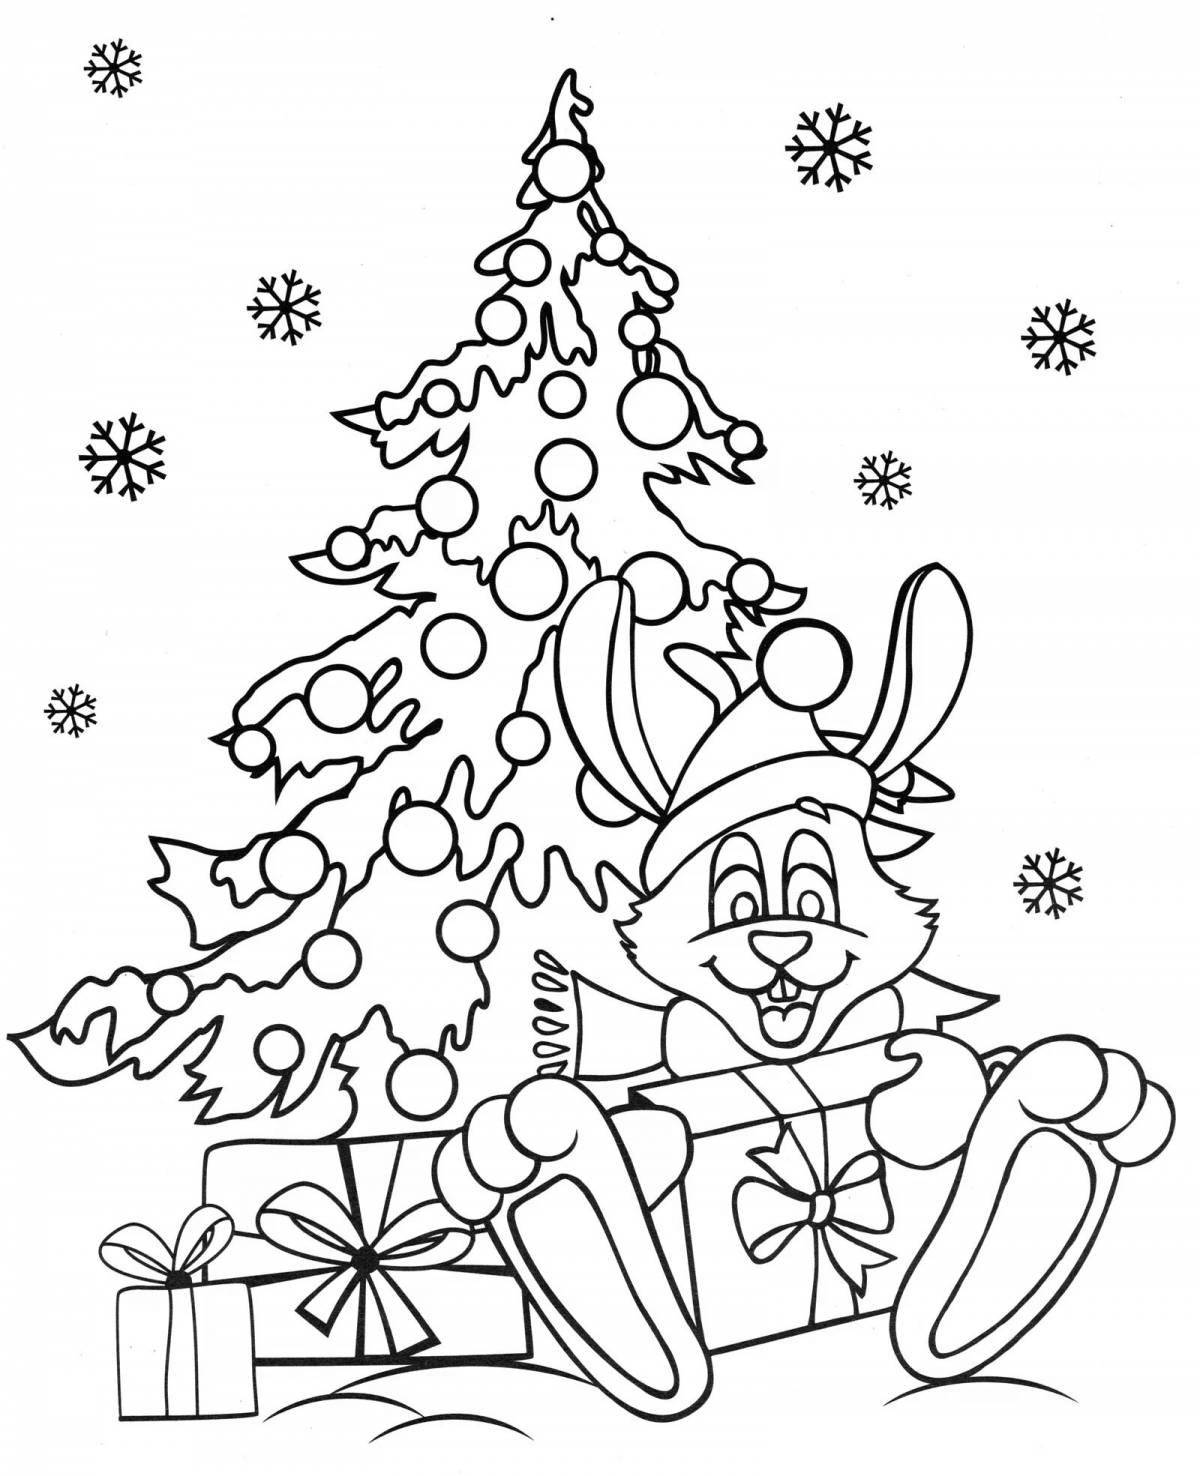 Christmas coloring book twinkling hare